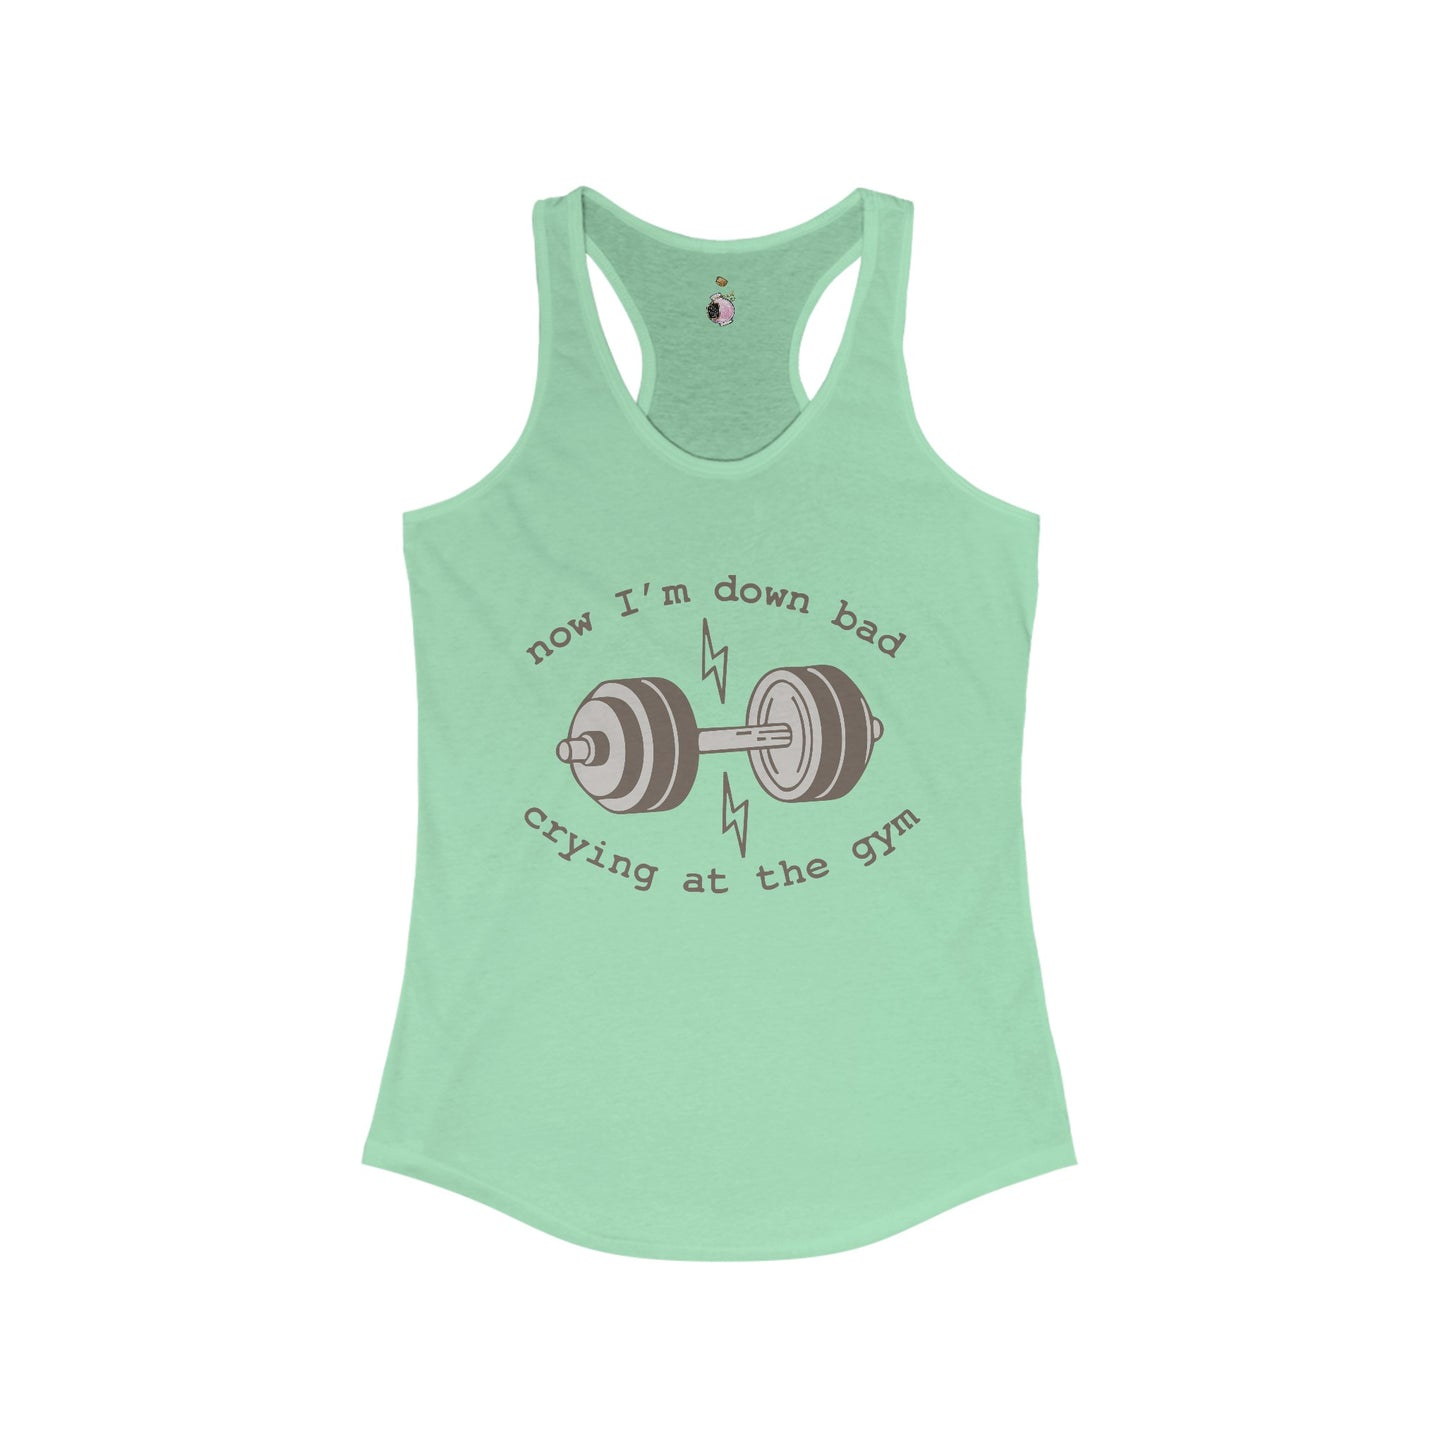 Down Bad Crying - Women's Ideal Racerback Tank